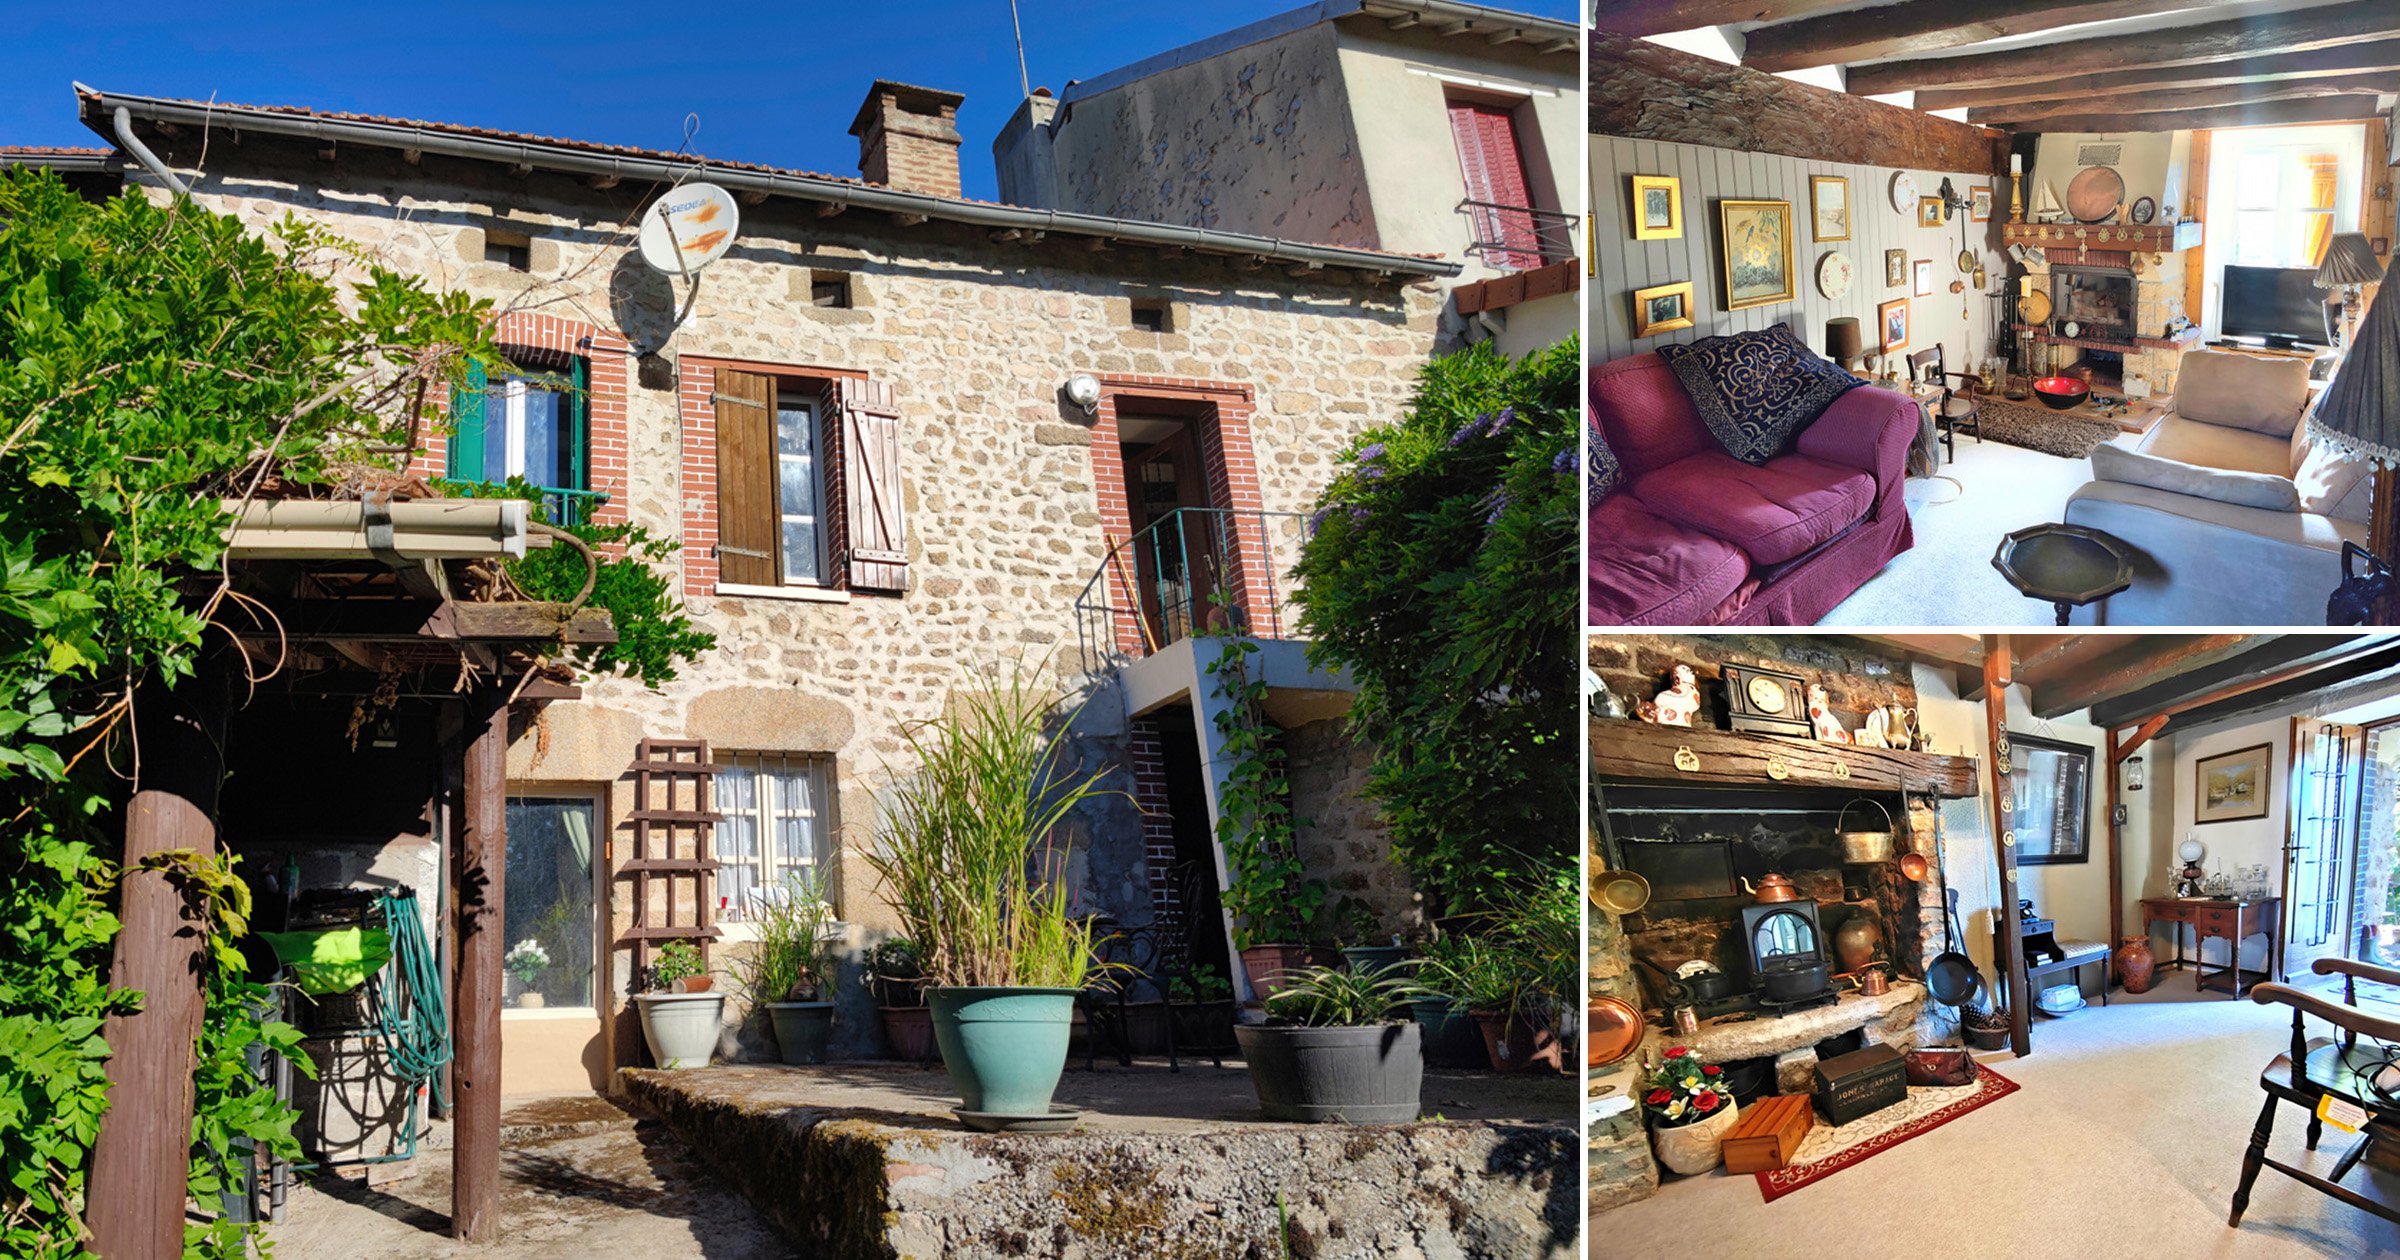 A rustic holiday home near Paris could be yours for £50,000